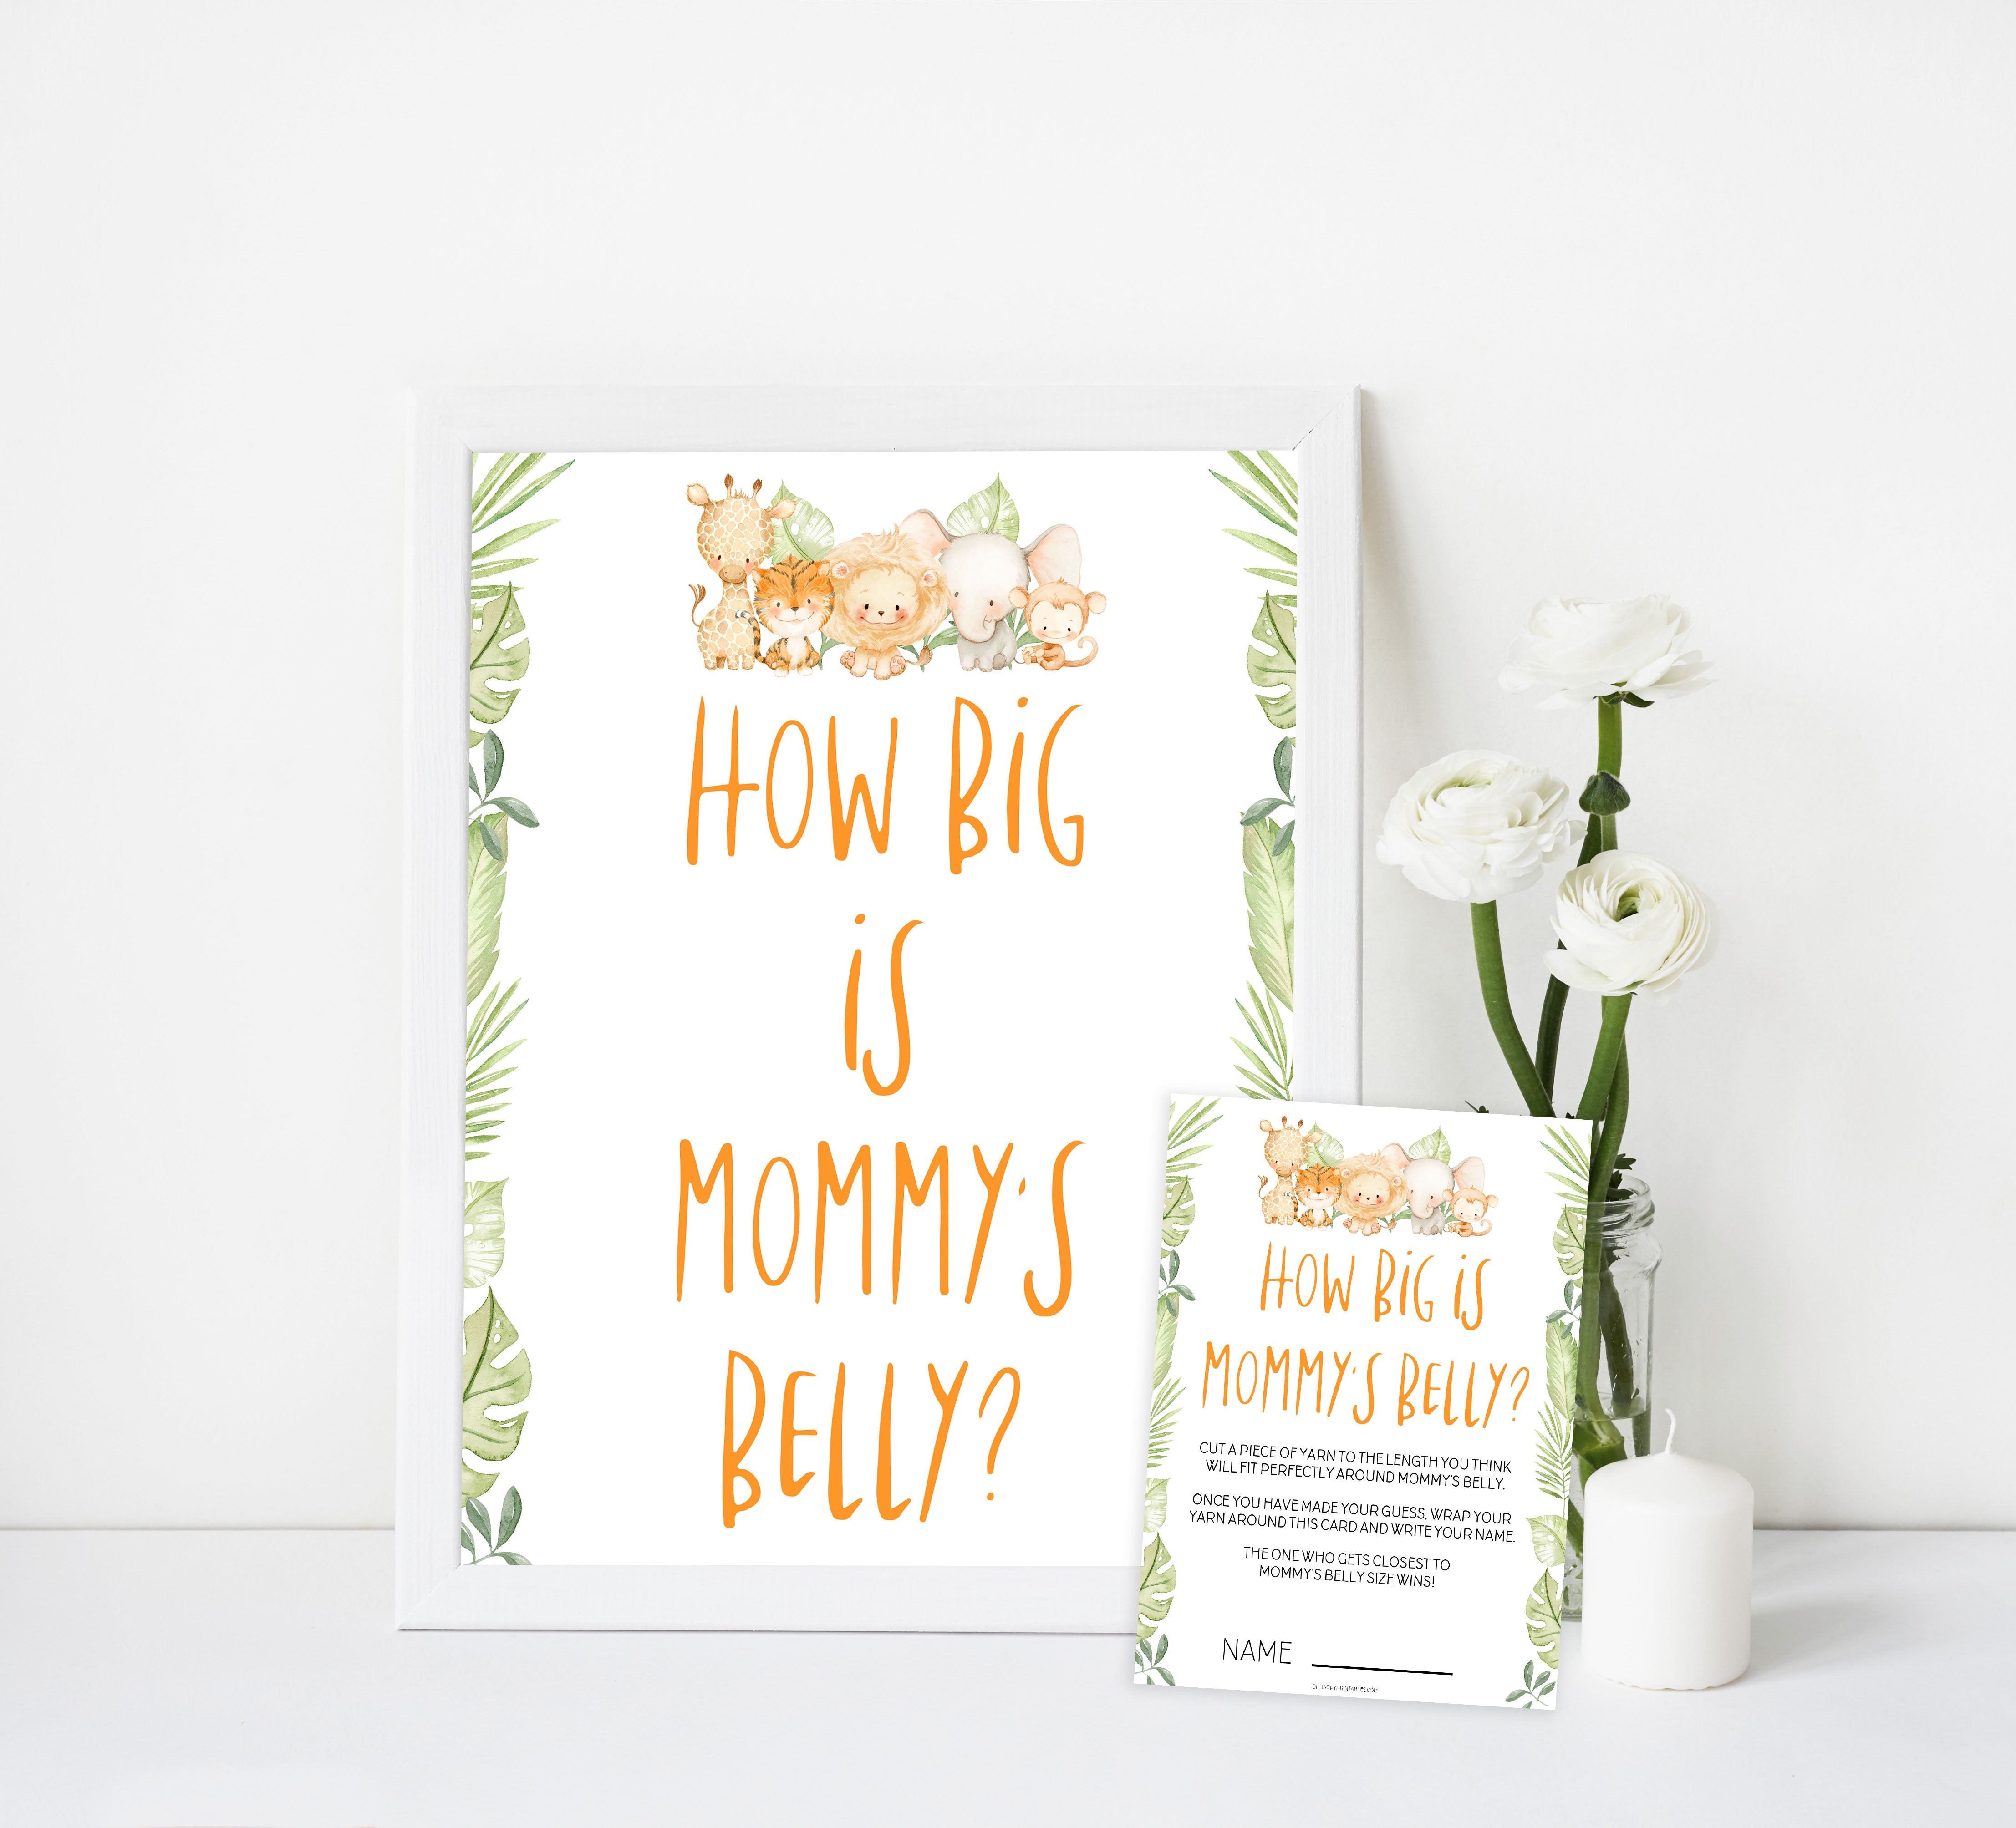 how big is mommys belly game, Printable baby shower games, safari animals baby games, baby shower games, fun baby shower ideas, top baby shower ideas, safari animals baby shower, baby shower games, fun baby shower ideas